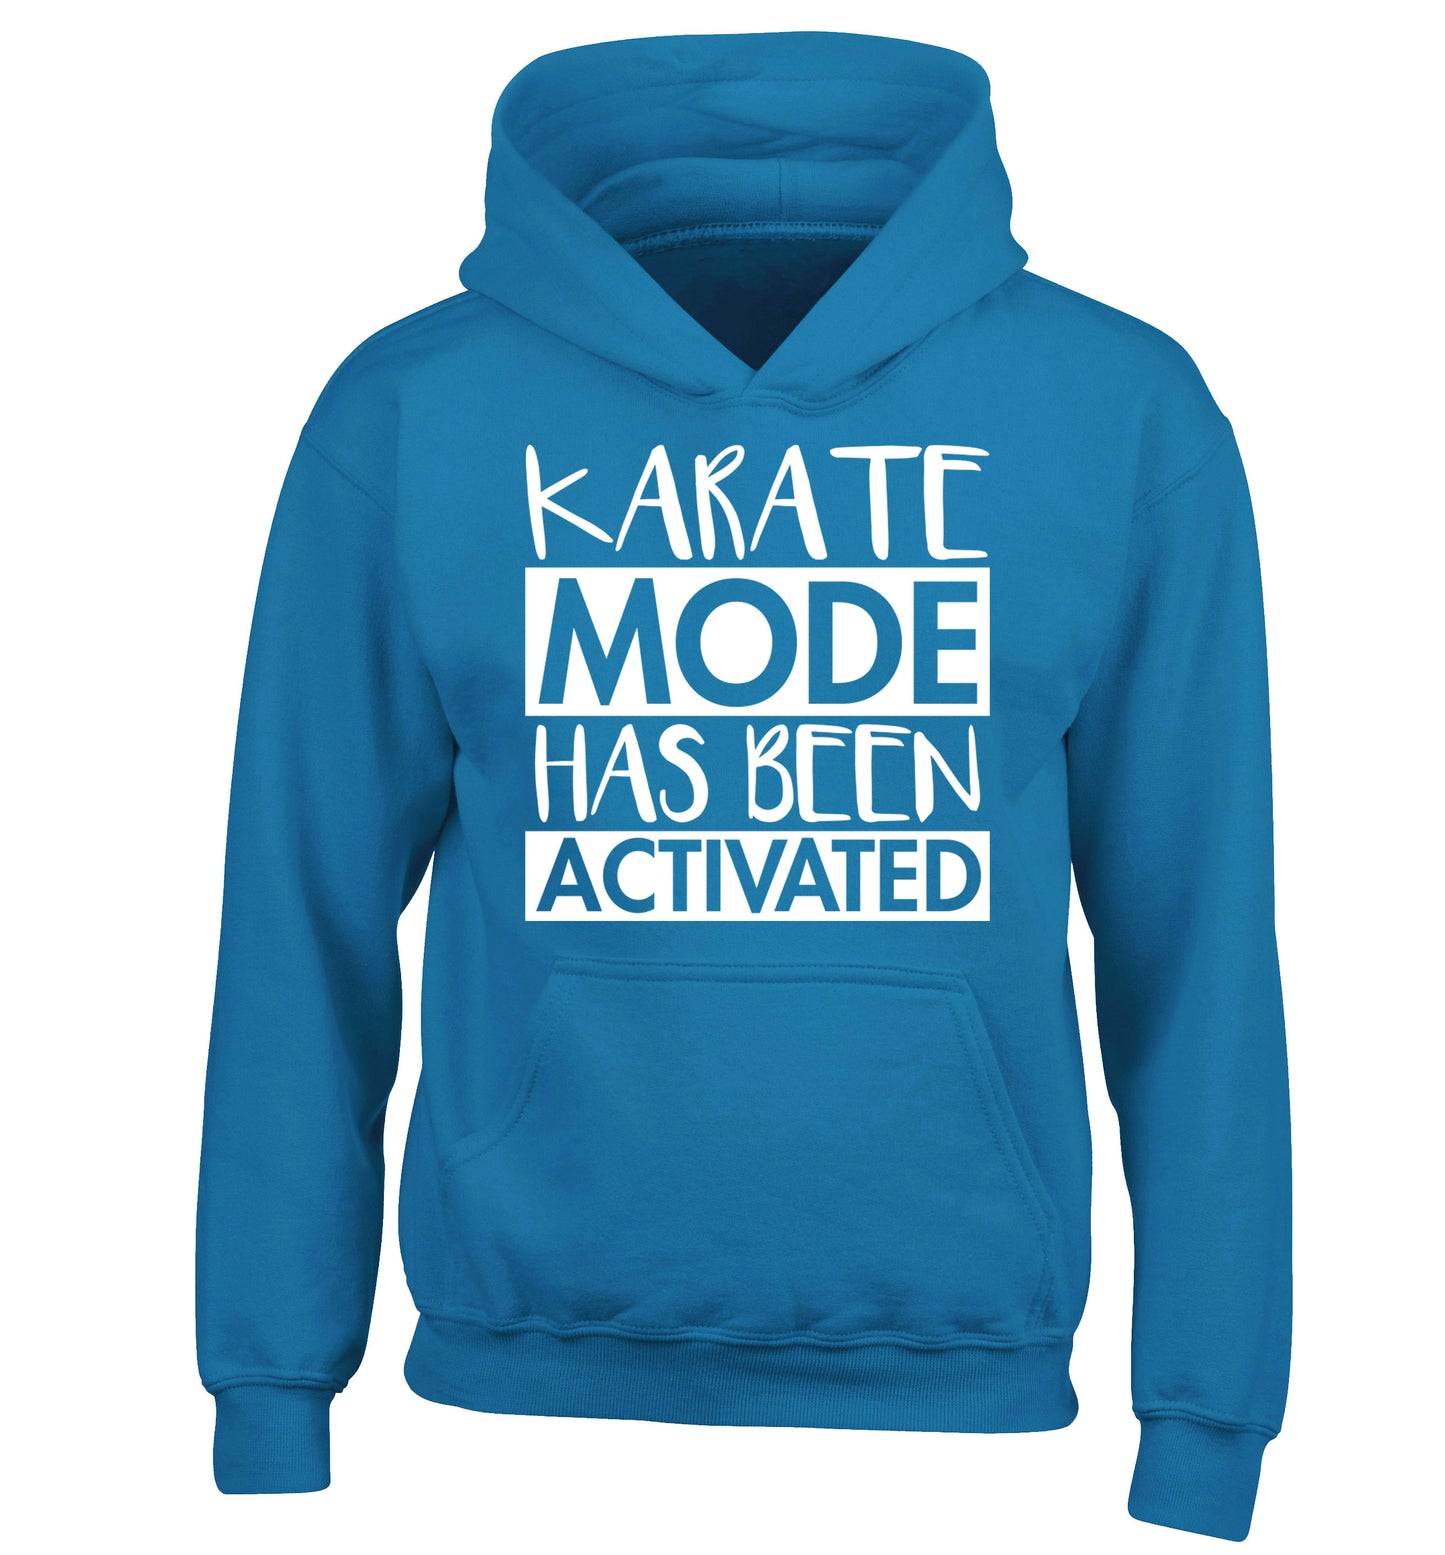 Karate mode activated children's blue hoodie 12-14 Years